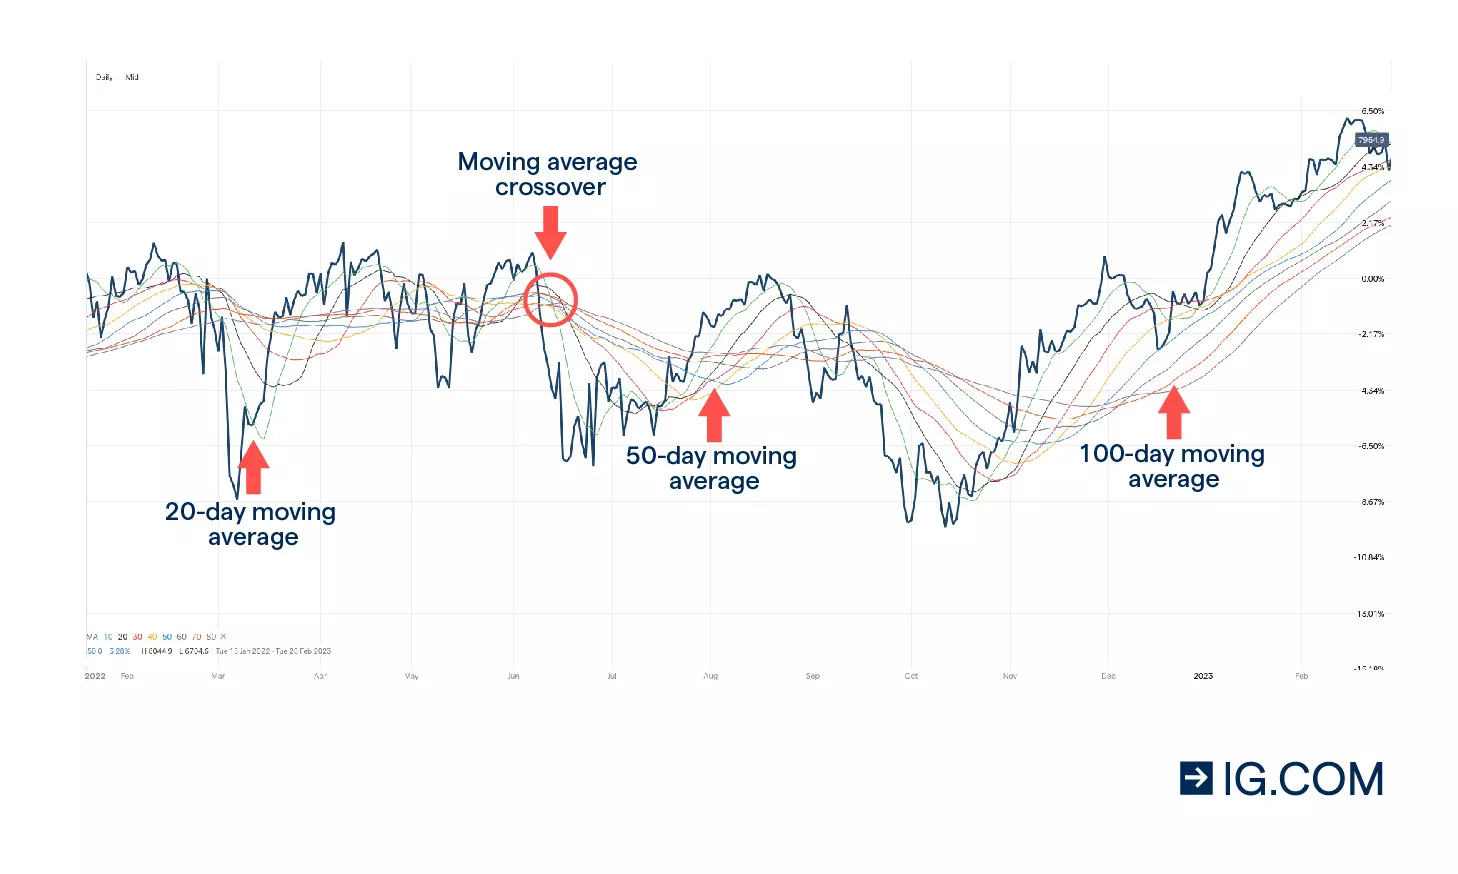 Trading chart of the FTSE 100 displaying varying price levels over a span of 12 months from 19 January 2022 to 25 February 2023 and includes three different moving average lines of 20-, 50-, 100- or 200-day period.